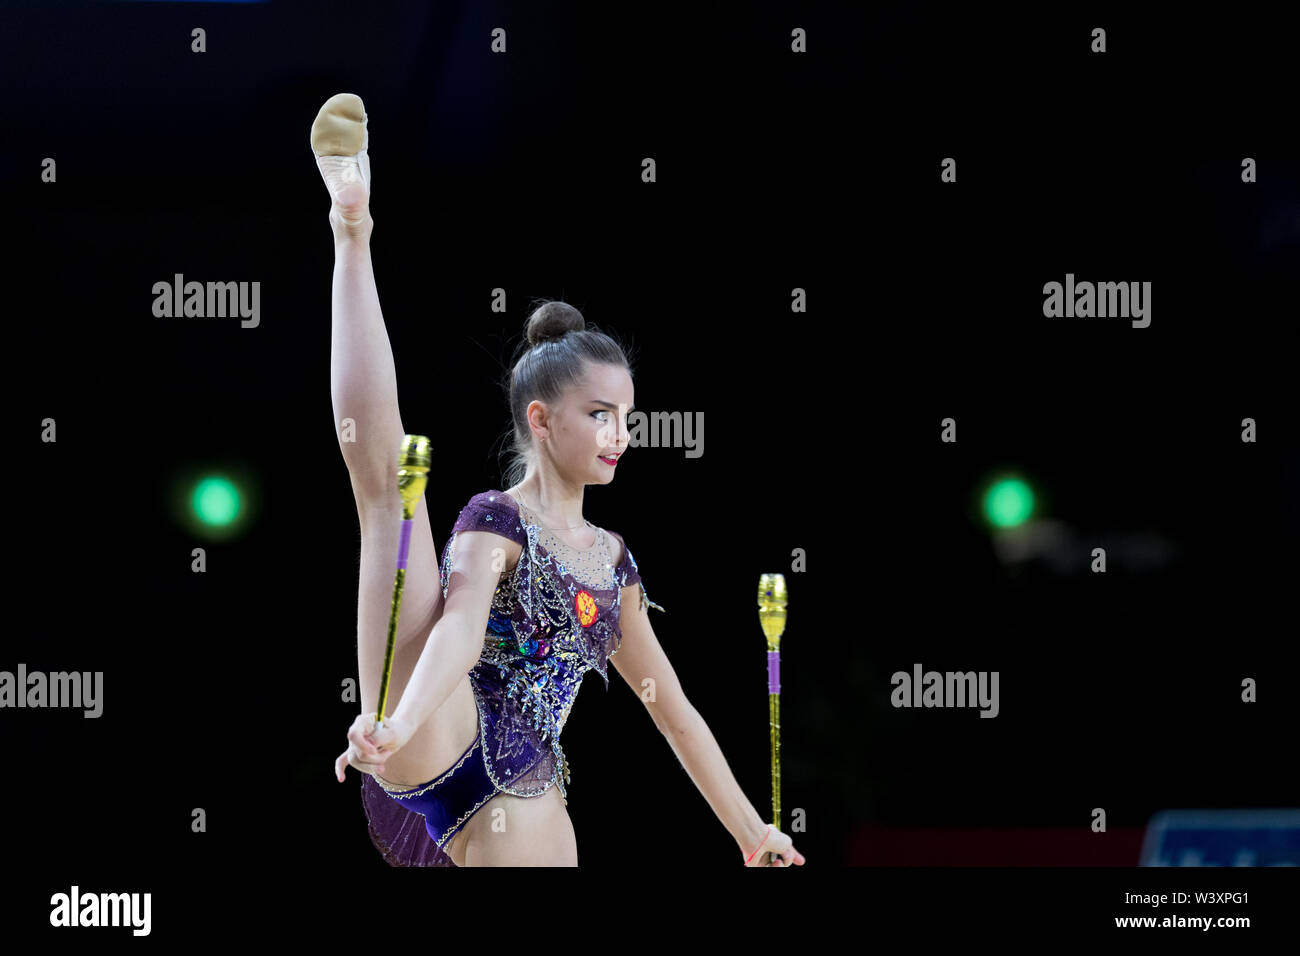 Dina Averina from Russia performs her clubs routine during 2019 Grand Prix de Thiais Stock Photo